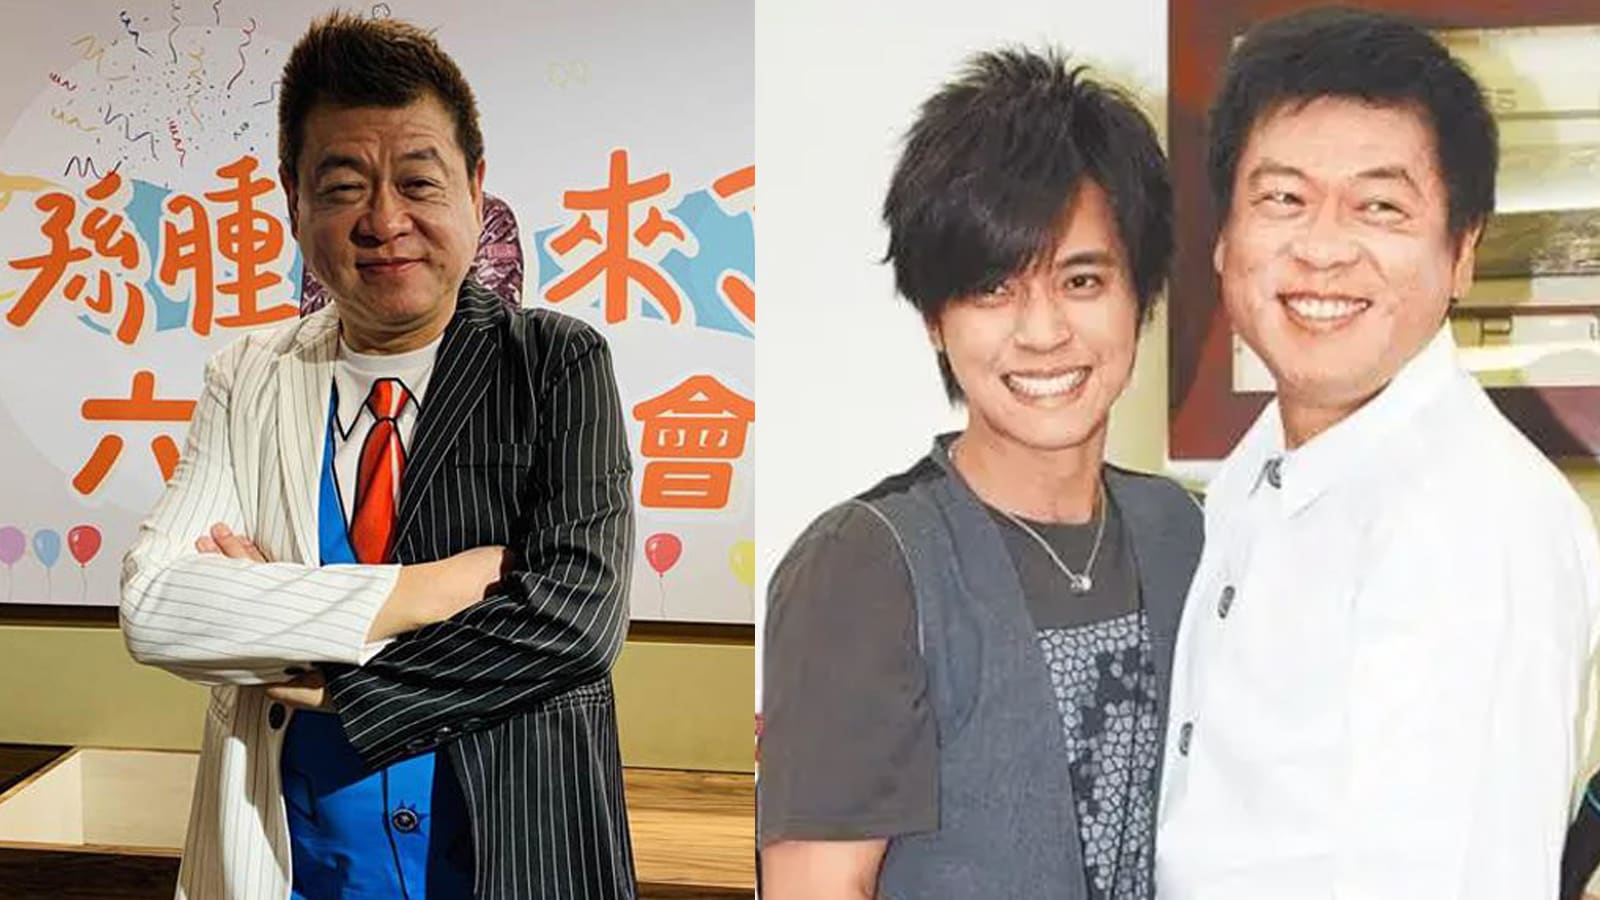 Show Luo And His Manager-Turned Nemesis Sun Derong Bury The Hatchet After 20 Years